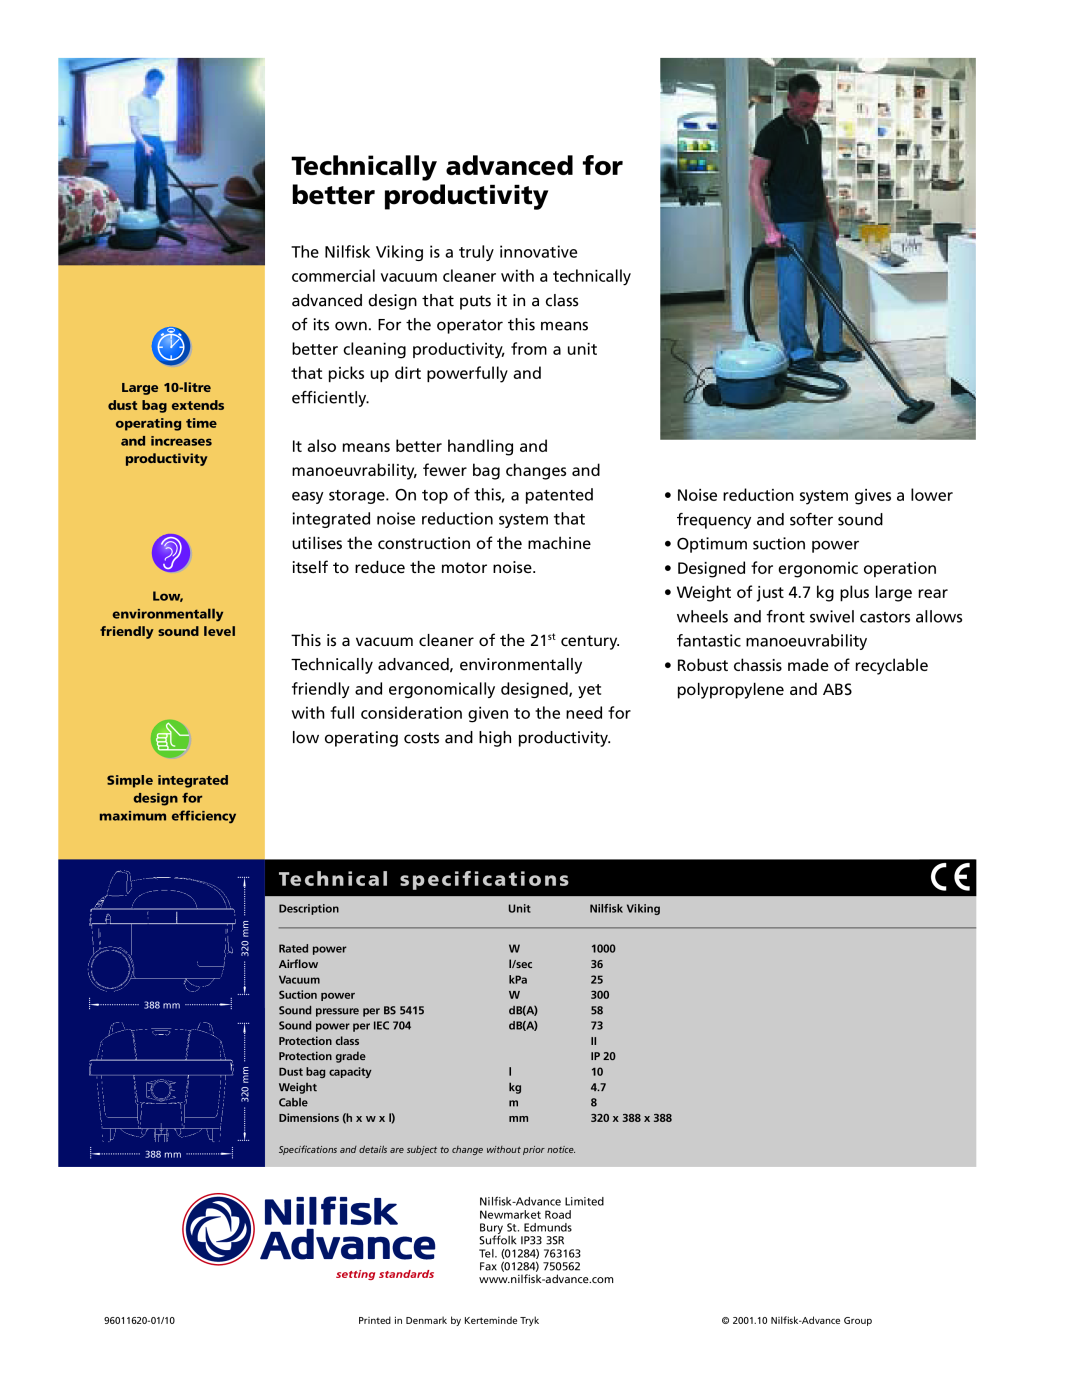 Nilfisk-Advance America Dry Vacuum Cleaner manual Technically advanced for better productivity, Technical specifications 